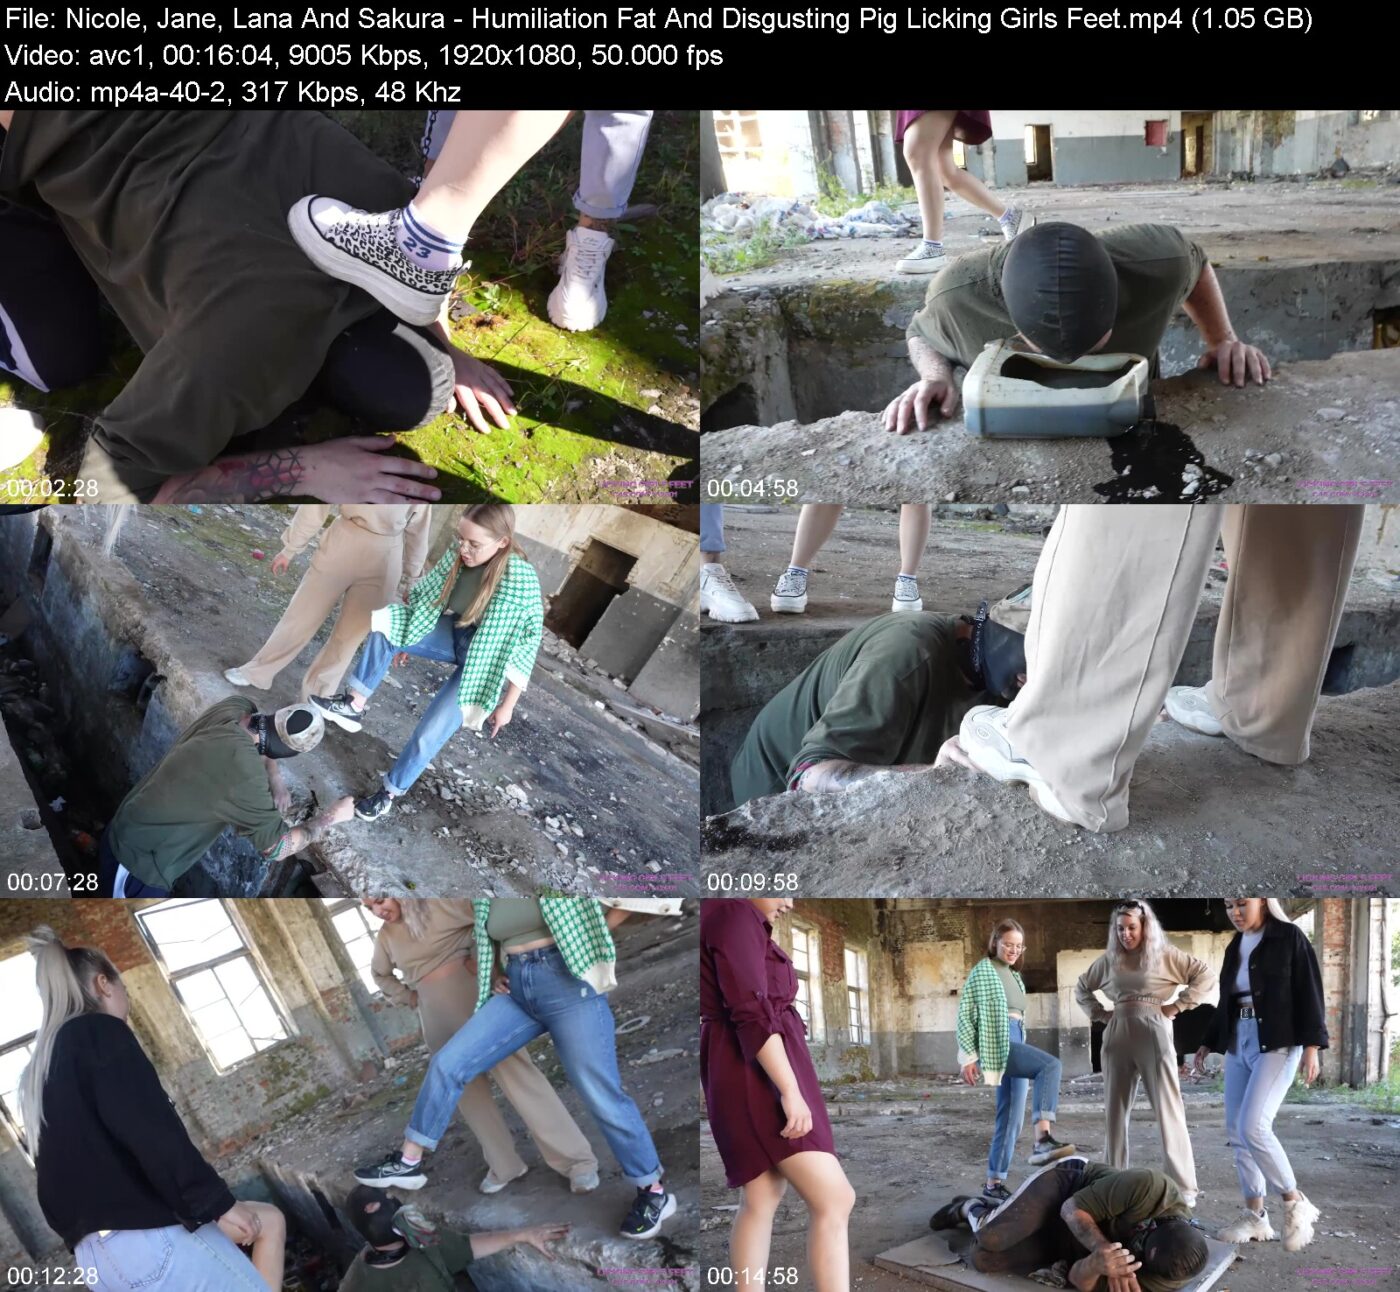 Actress: Nicole, Jane, Lana And Sakura. Title and Studio: Humiliation Fat And Disgusting Pig Licking Girls Feet